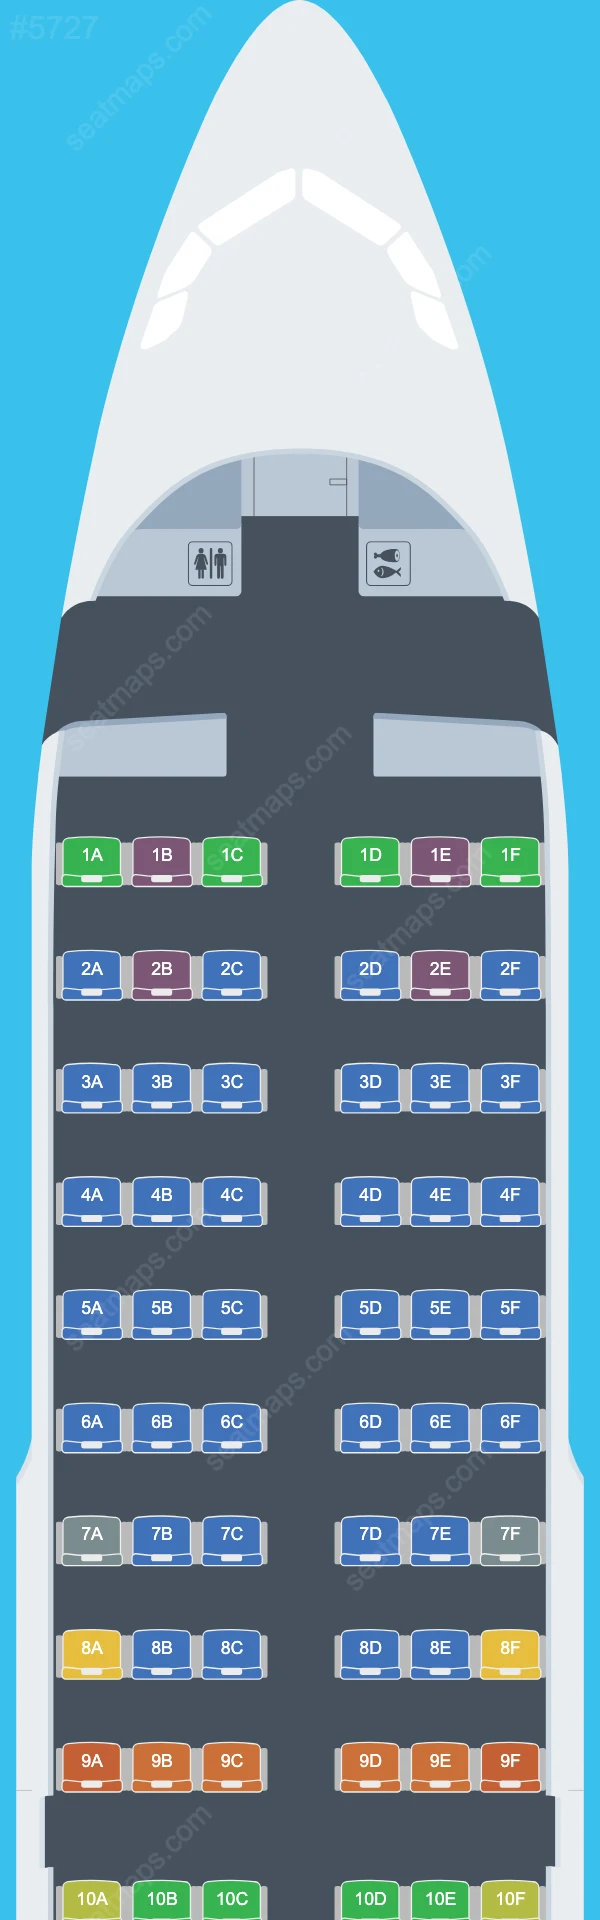 CSA Czech Airlines Airbus A319 Seat Maps A319-100 V.1